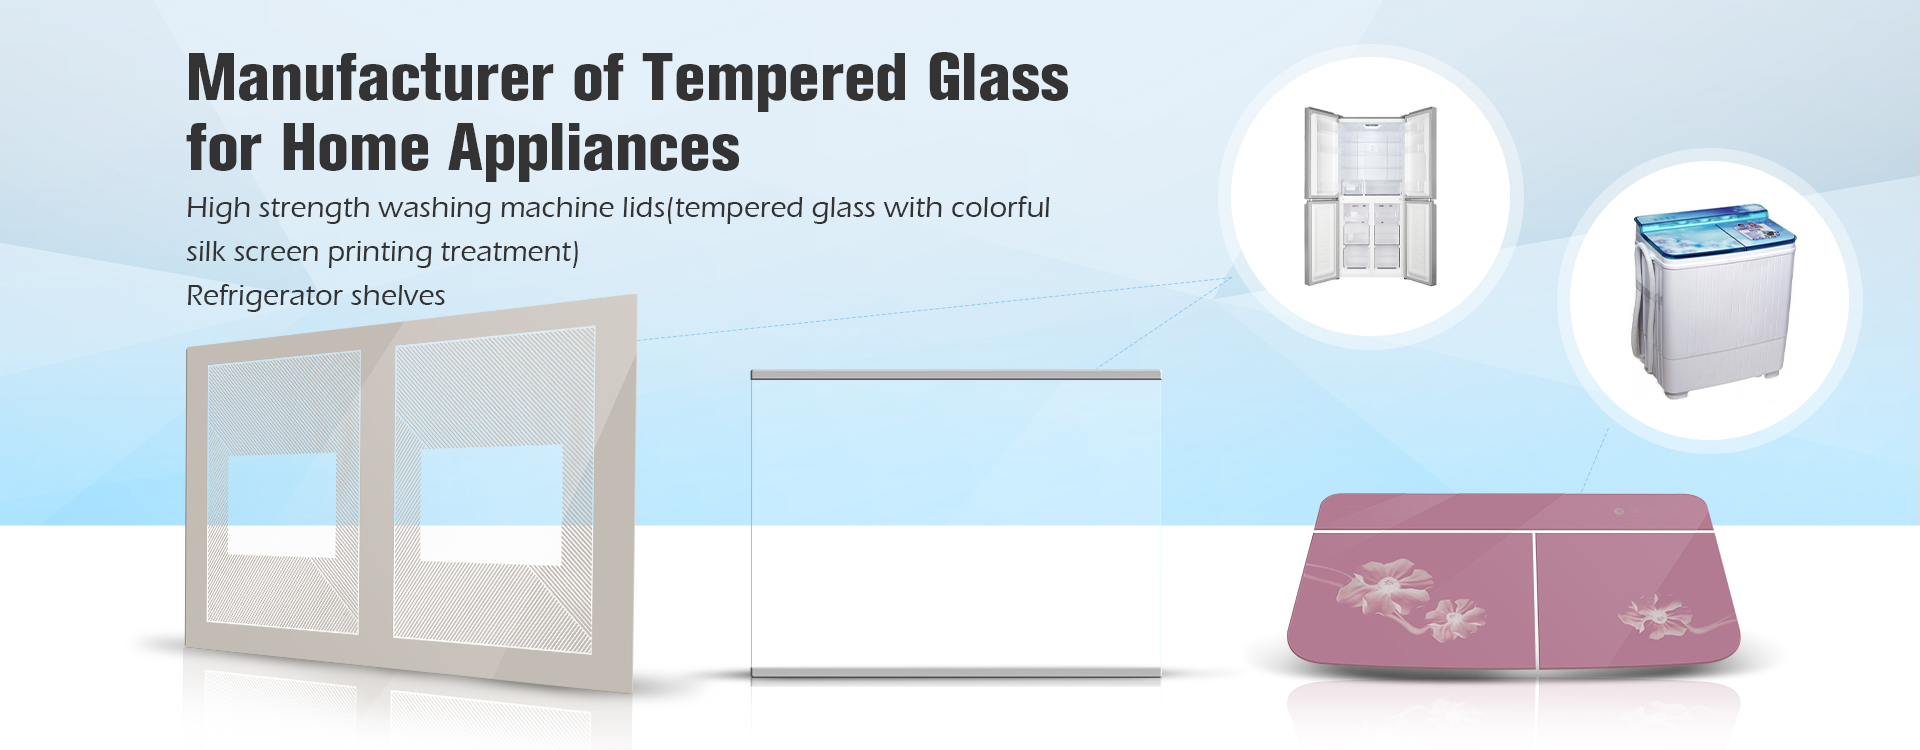 Tempered Glass Panel Delivery Times